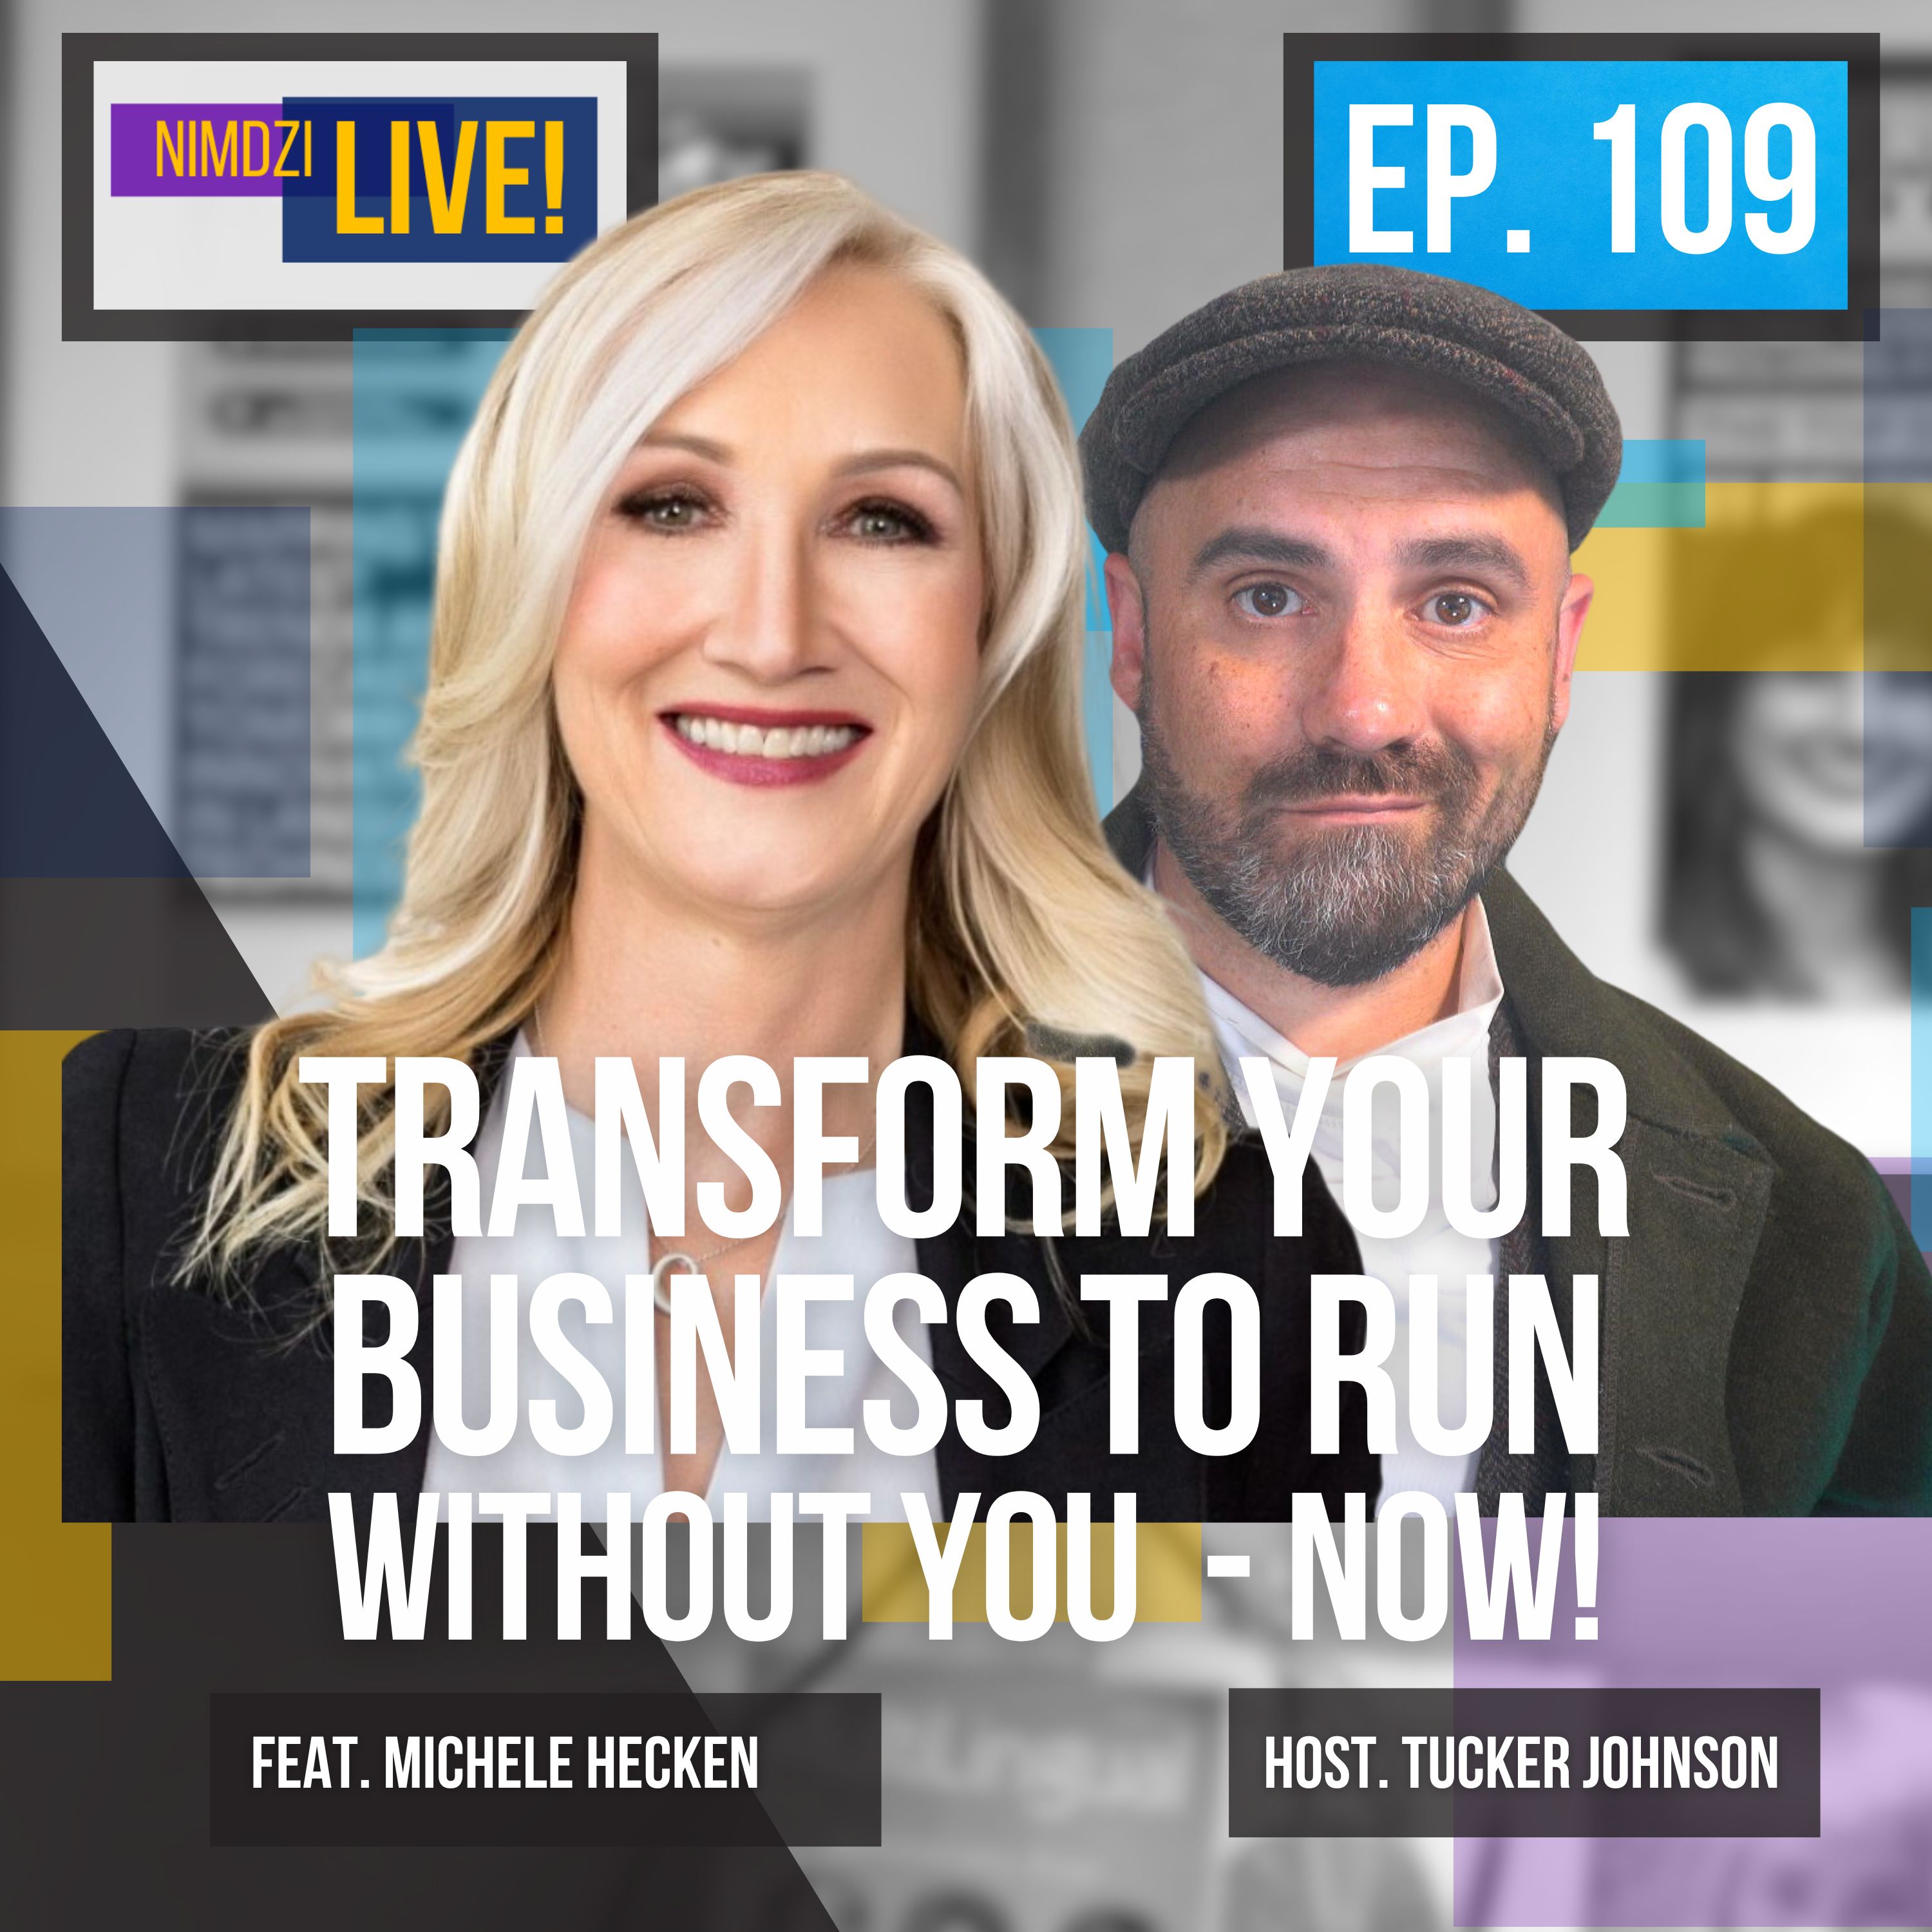 Transform your business to run without you - now! feat. Michele Hecken